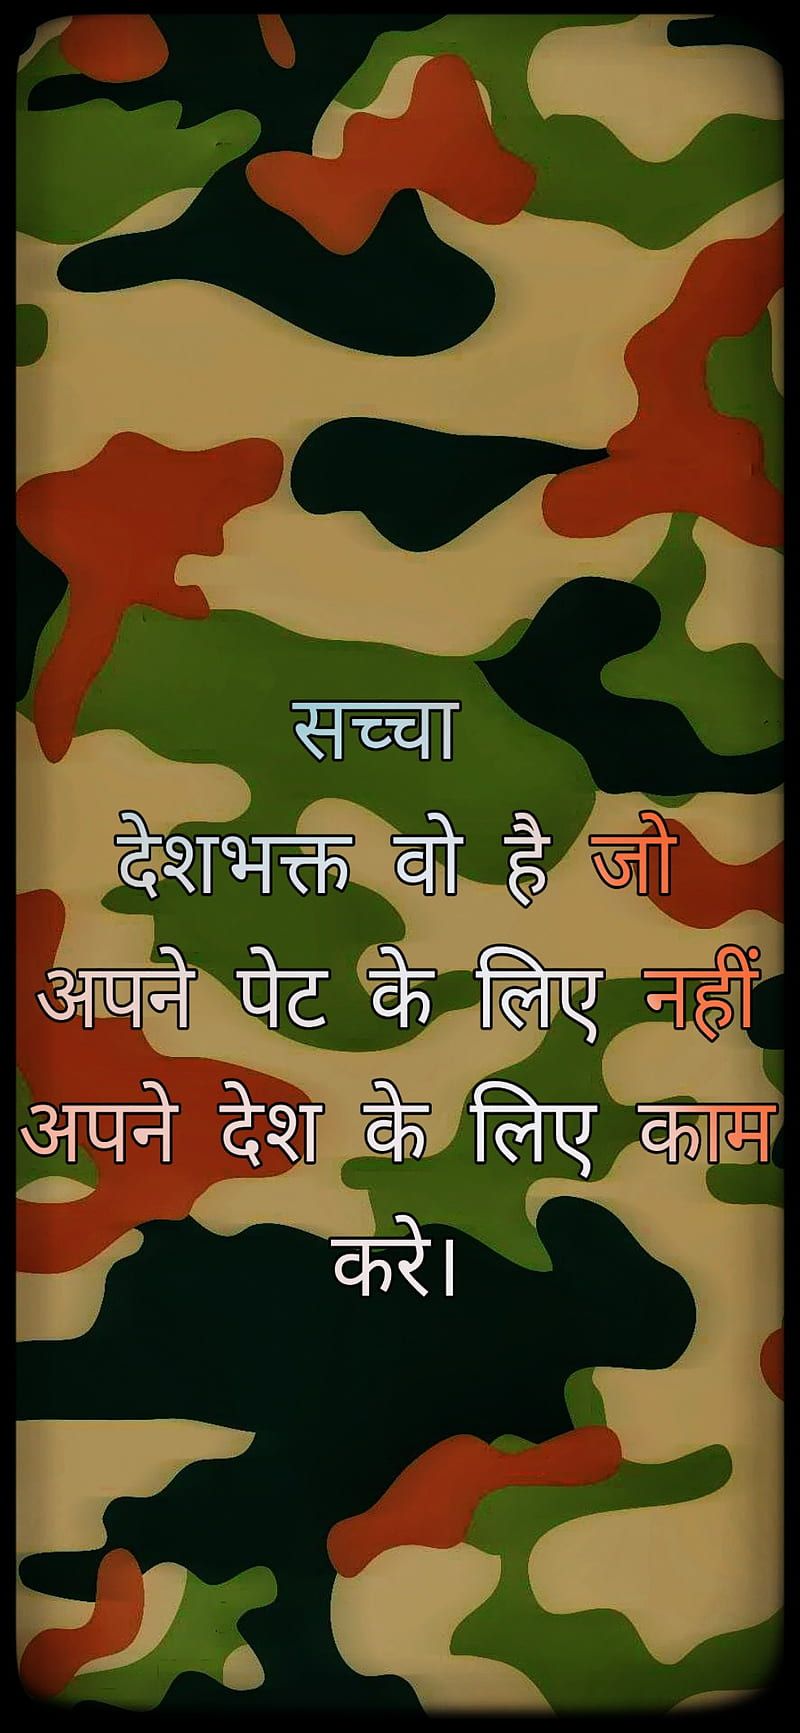 20+ Free Indian Army & Army Images - Pixabay